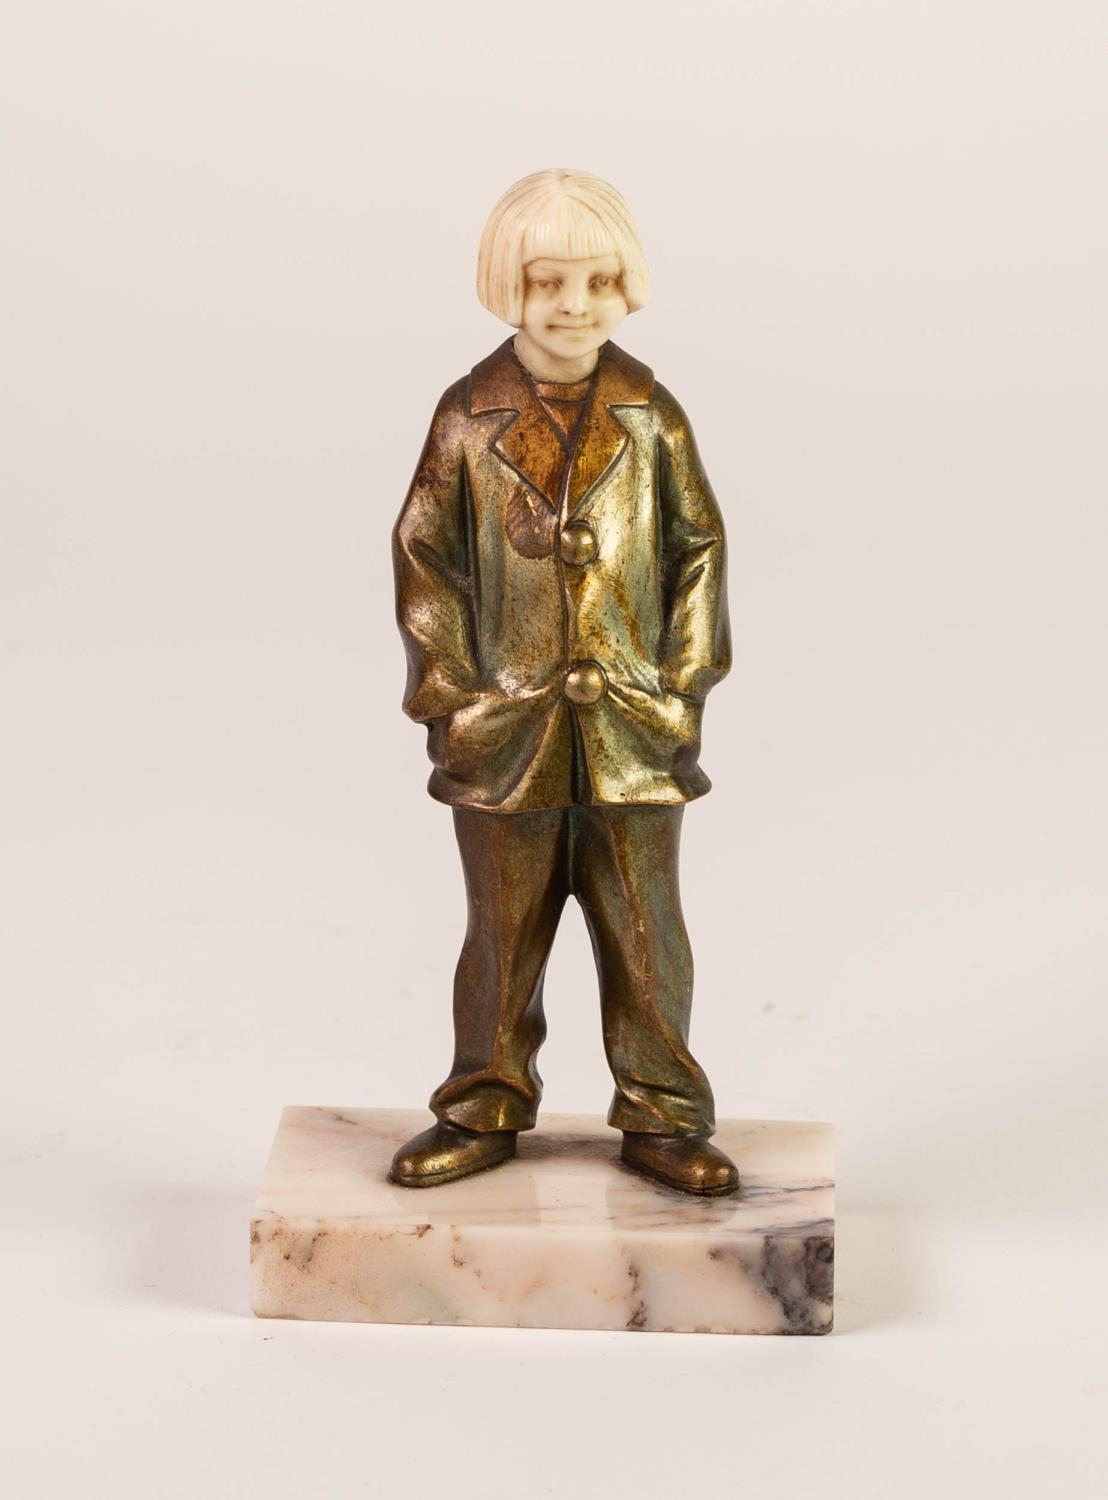 S. BERTRAND, (FRENCH EARLY 20th CENTURY), 1920s/1930s GILT BRONZE AND IVORY FIGURE OF A YOUNG